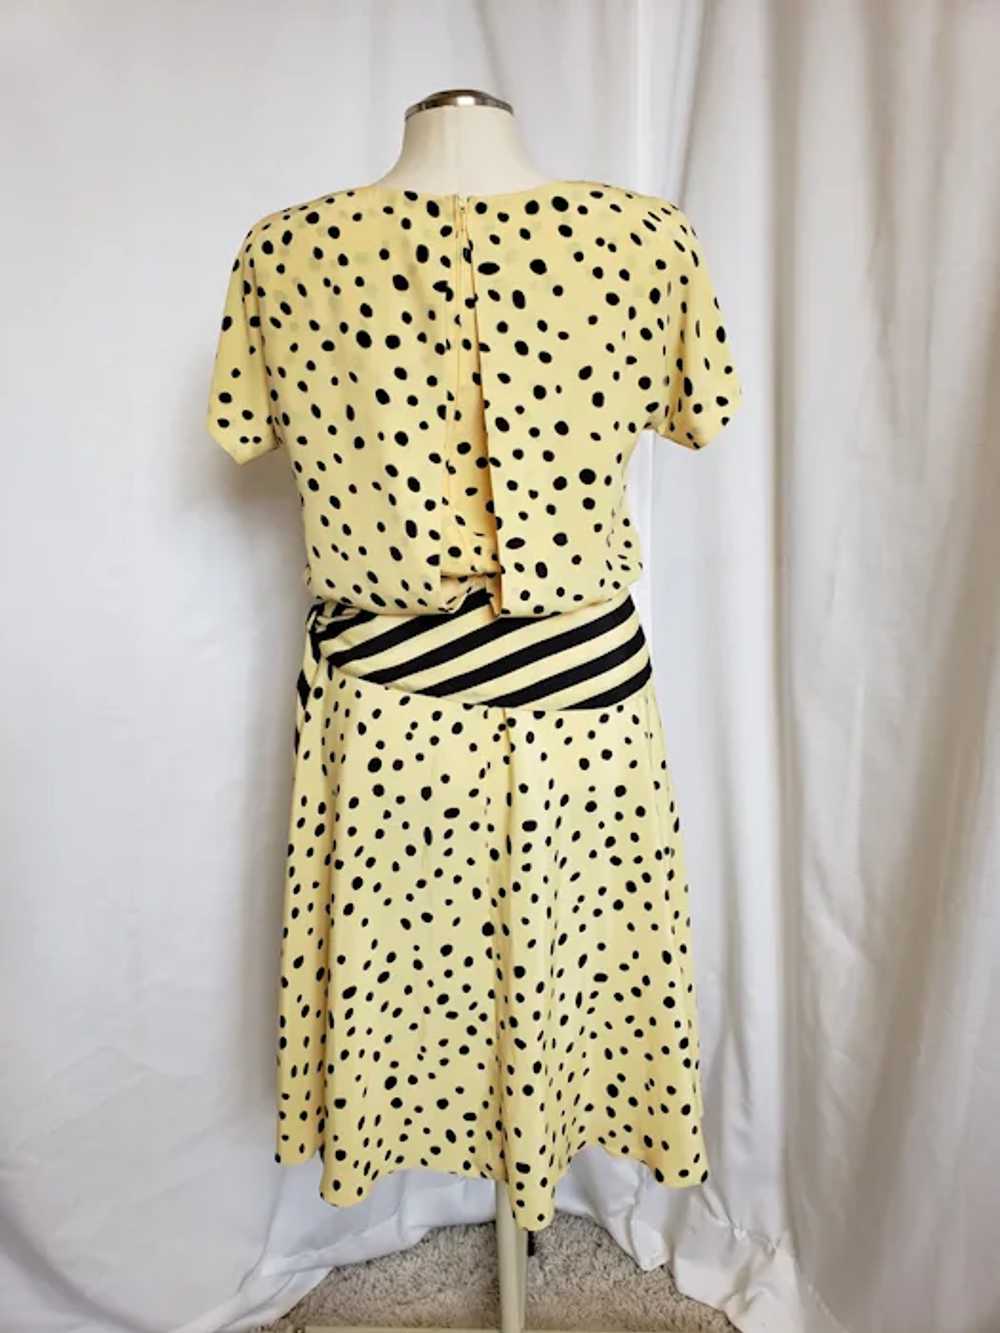 Sunny Yellow and Black Dots 'n Stripes Dress - image 9